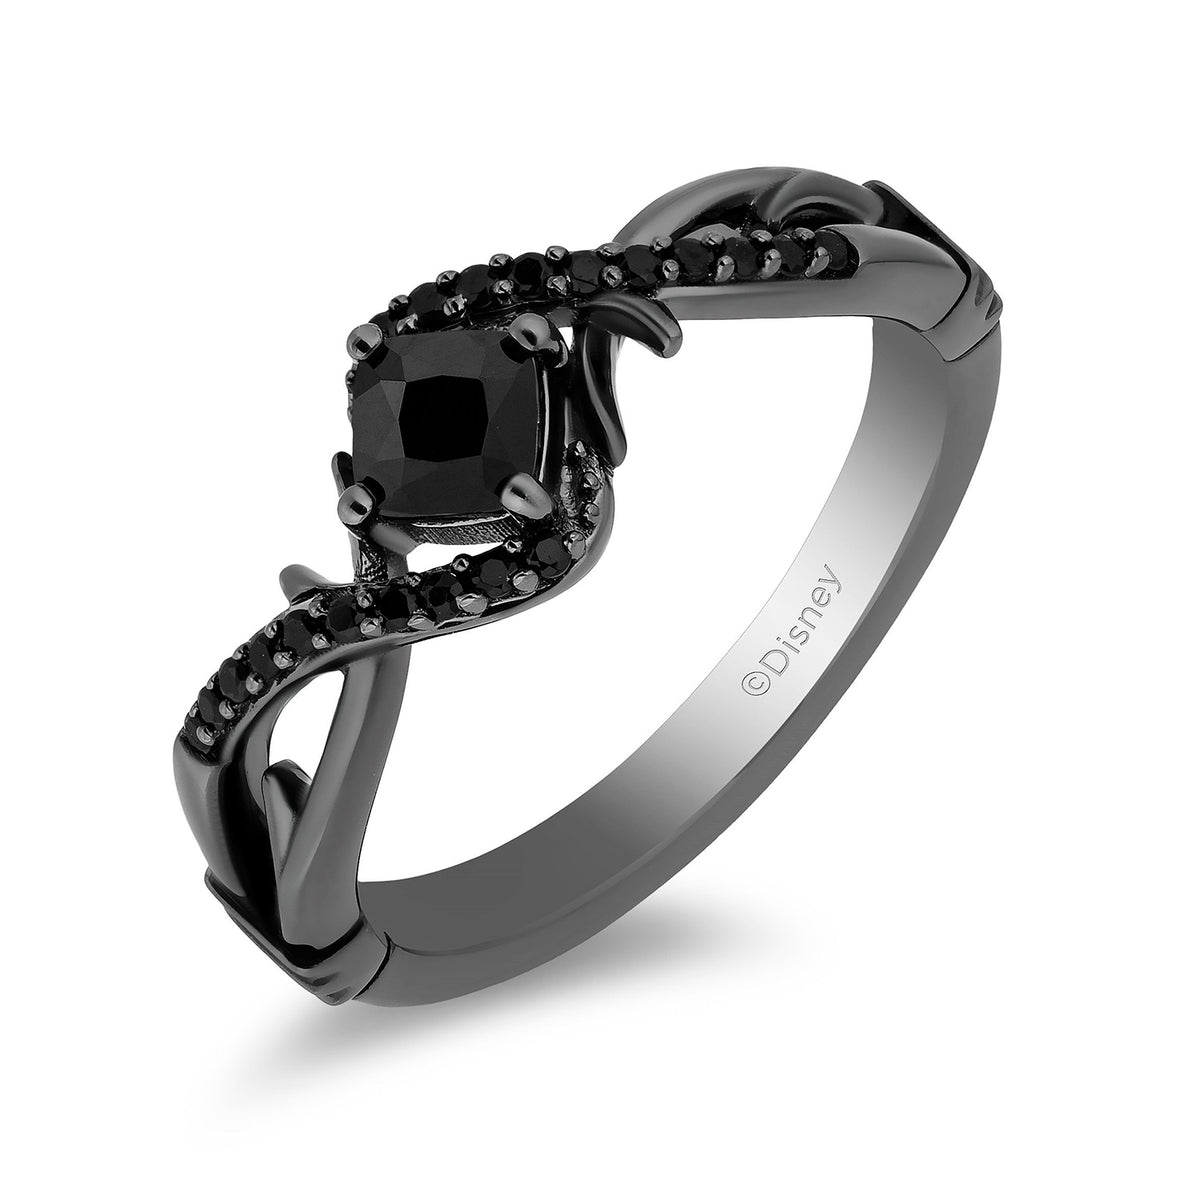 Buy Black And White Diamonds Engagement Ring only – NOOI JEWELRY